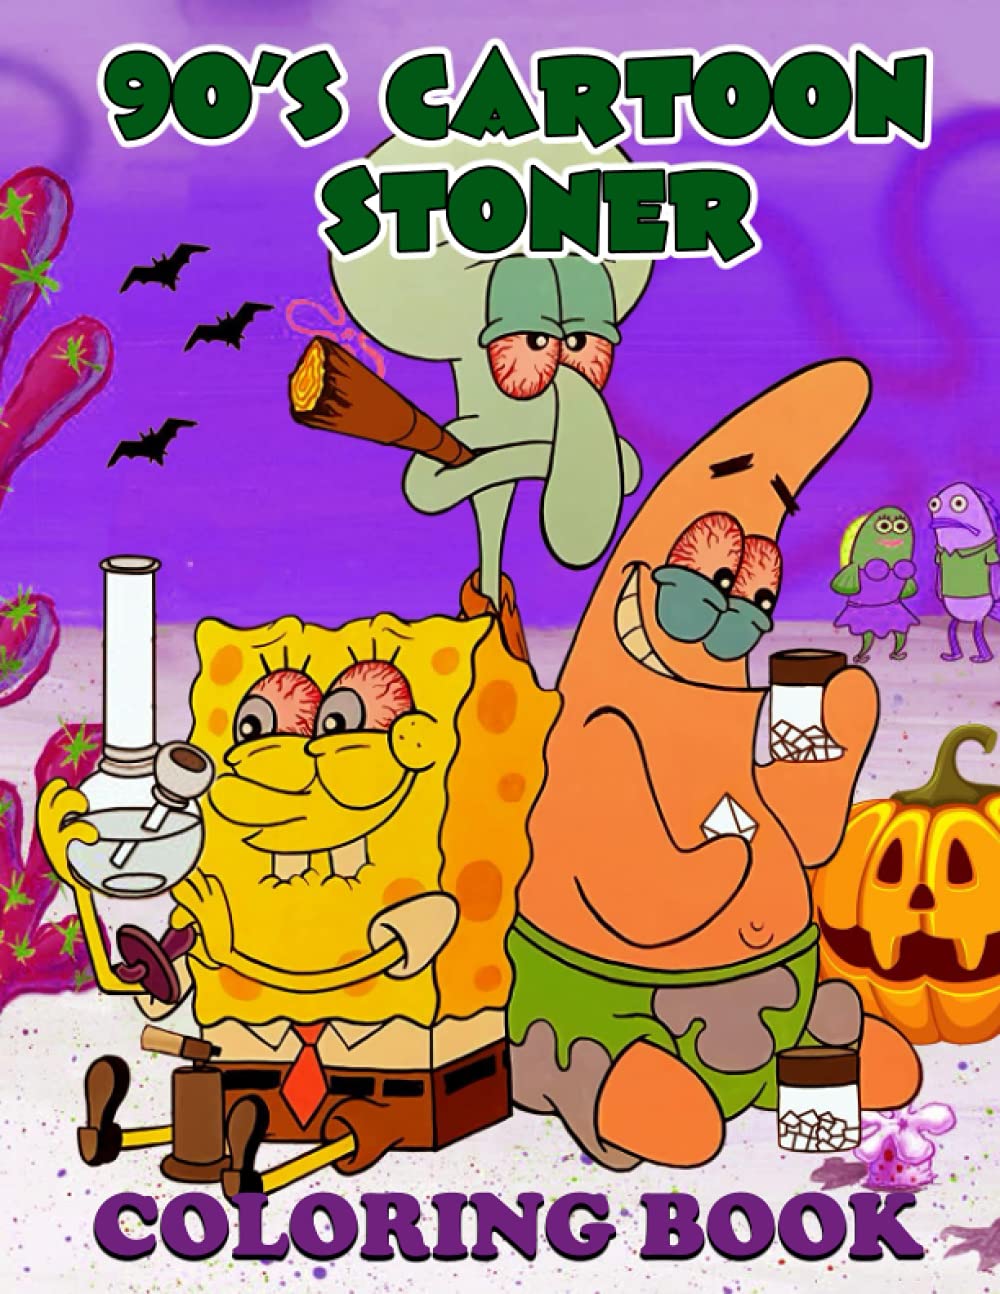 Spongebob Stoner Coloring Book: Beautiful Psychedelic Trippy and